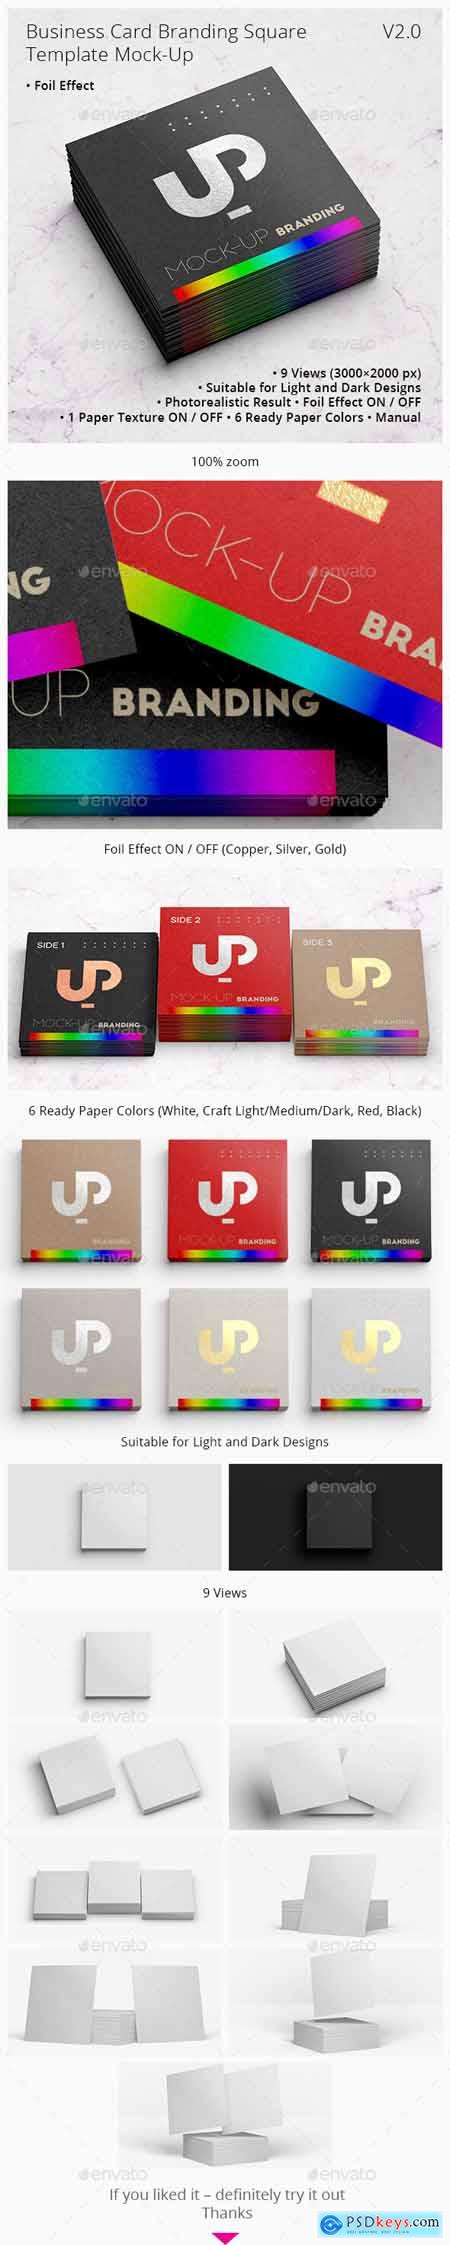 Business Card Branding with Foil effect Square Template Mock-Up V2.0 28422485